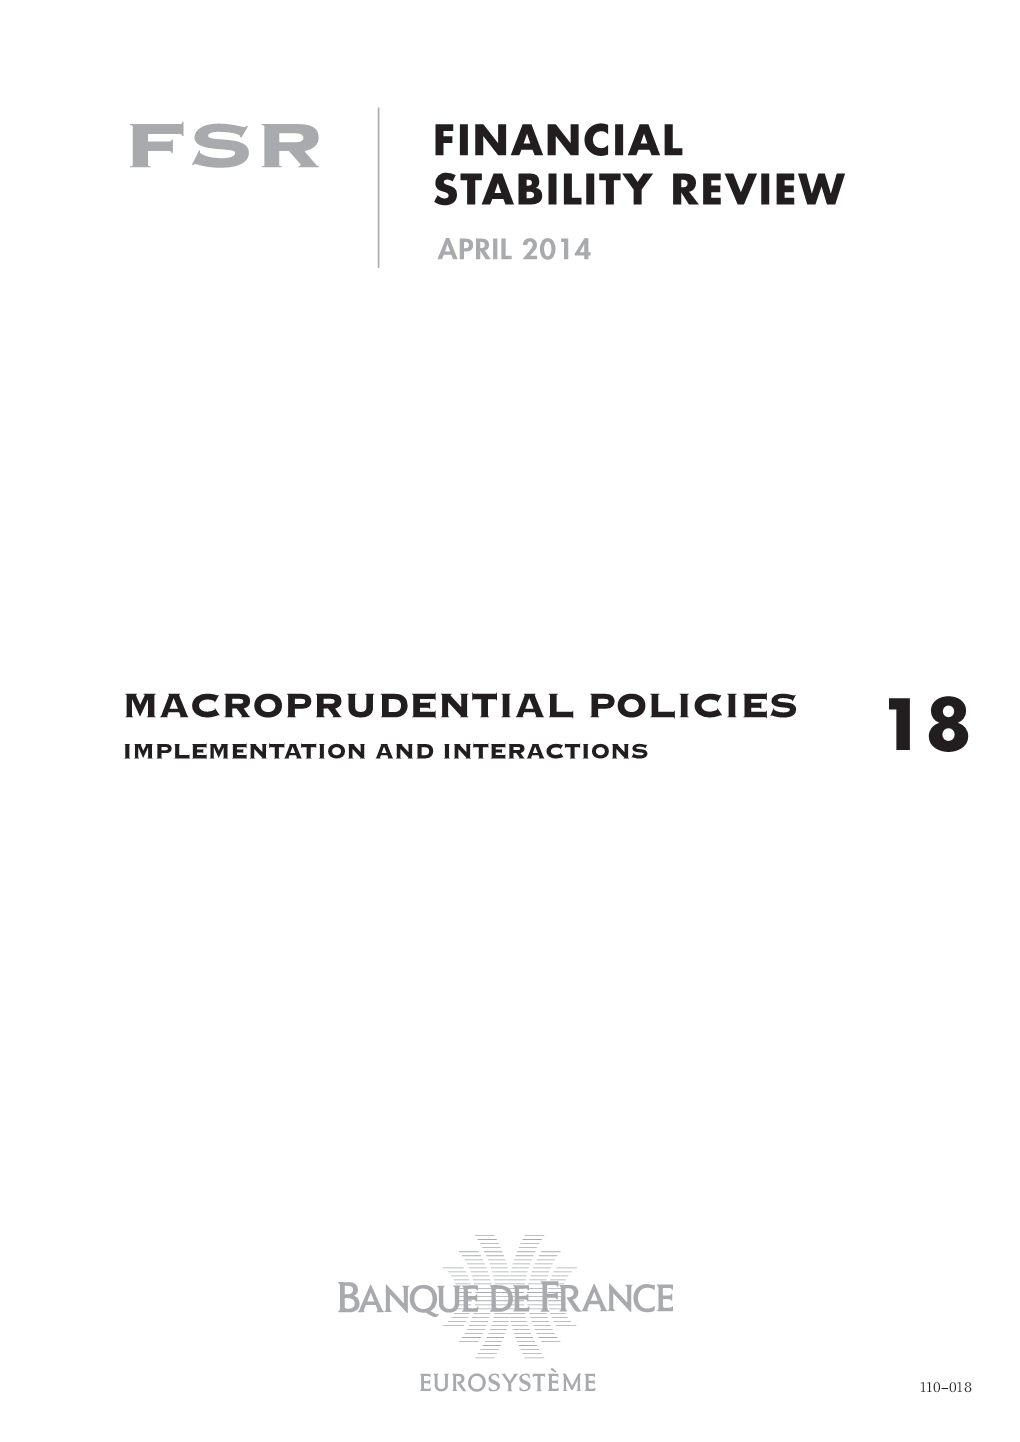 Macroprudential Policies Implementation and Interactions 18